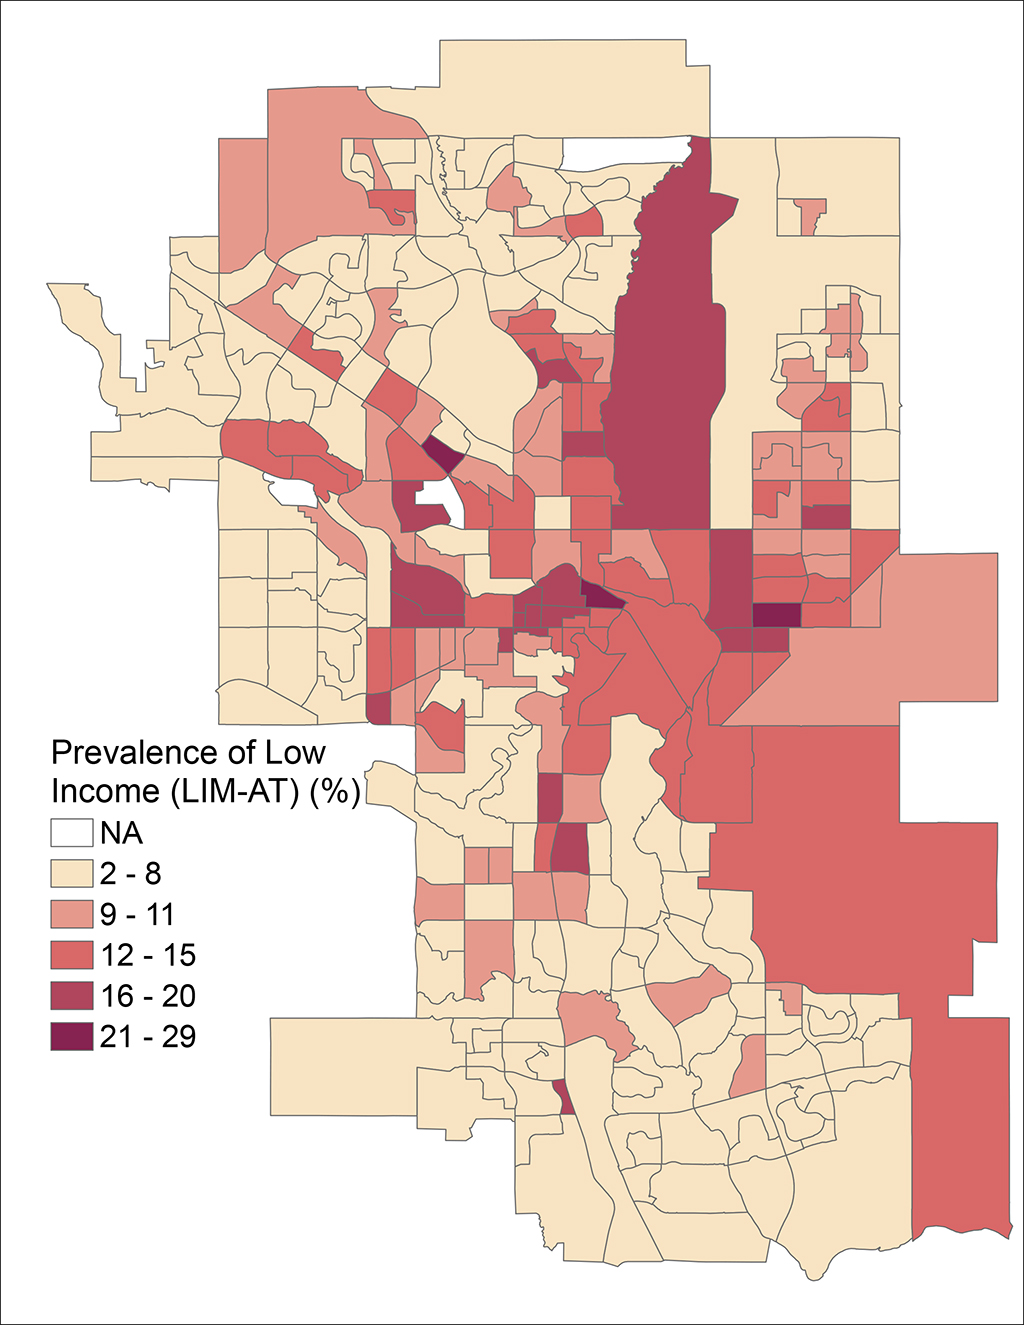 Percent in low income (LIM-AT) by census tract, 2020